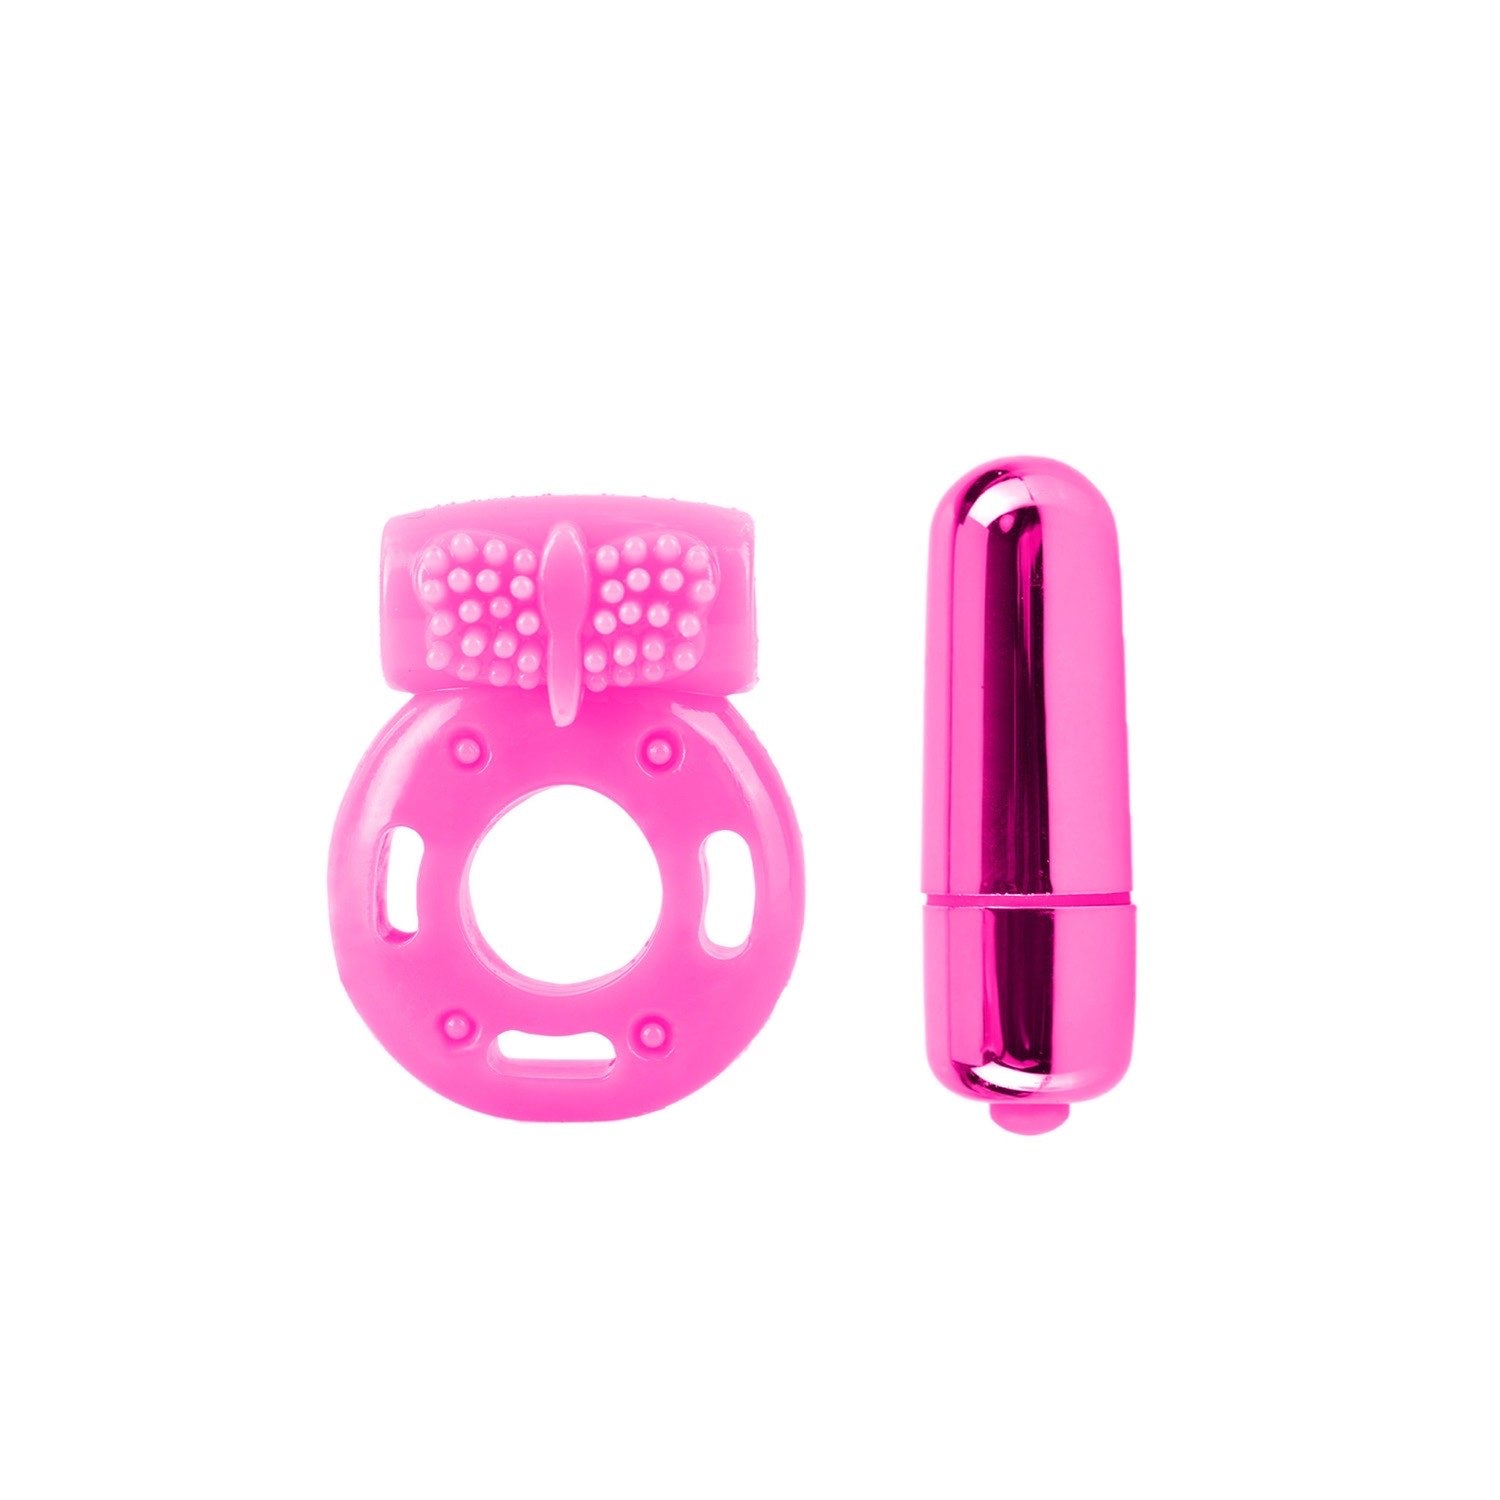  Neon Vibrating Couples Kit - Pink - 3 Piece Set by Pipedream